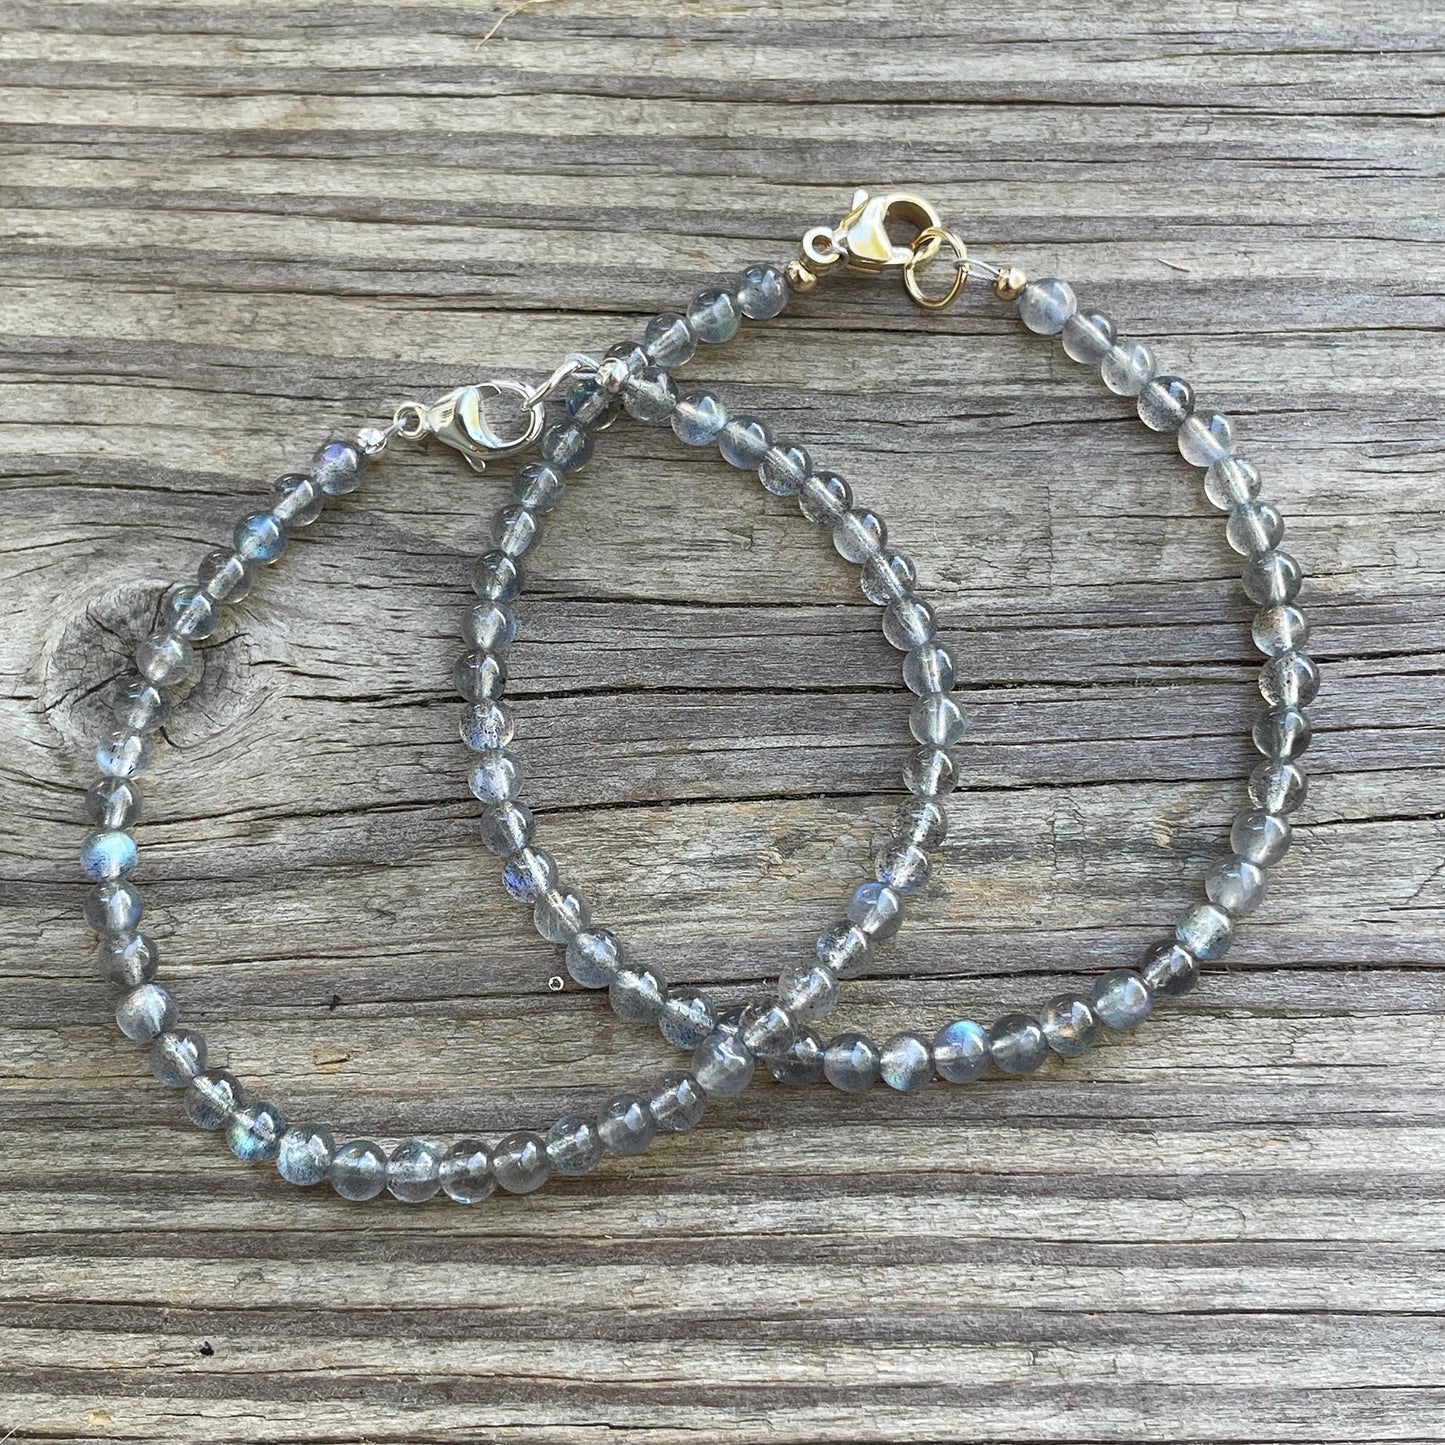 4mm Labradorite Bead Bracelet with Gold or Silver Clasp